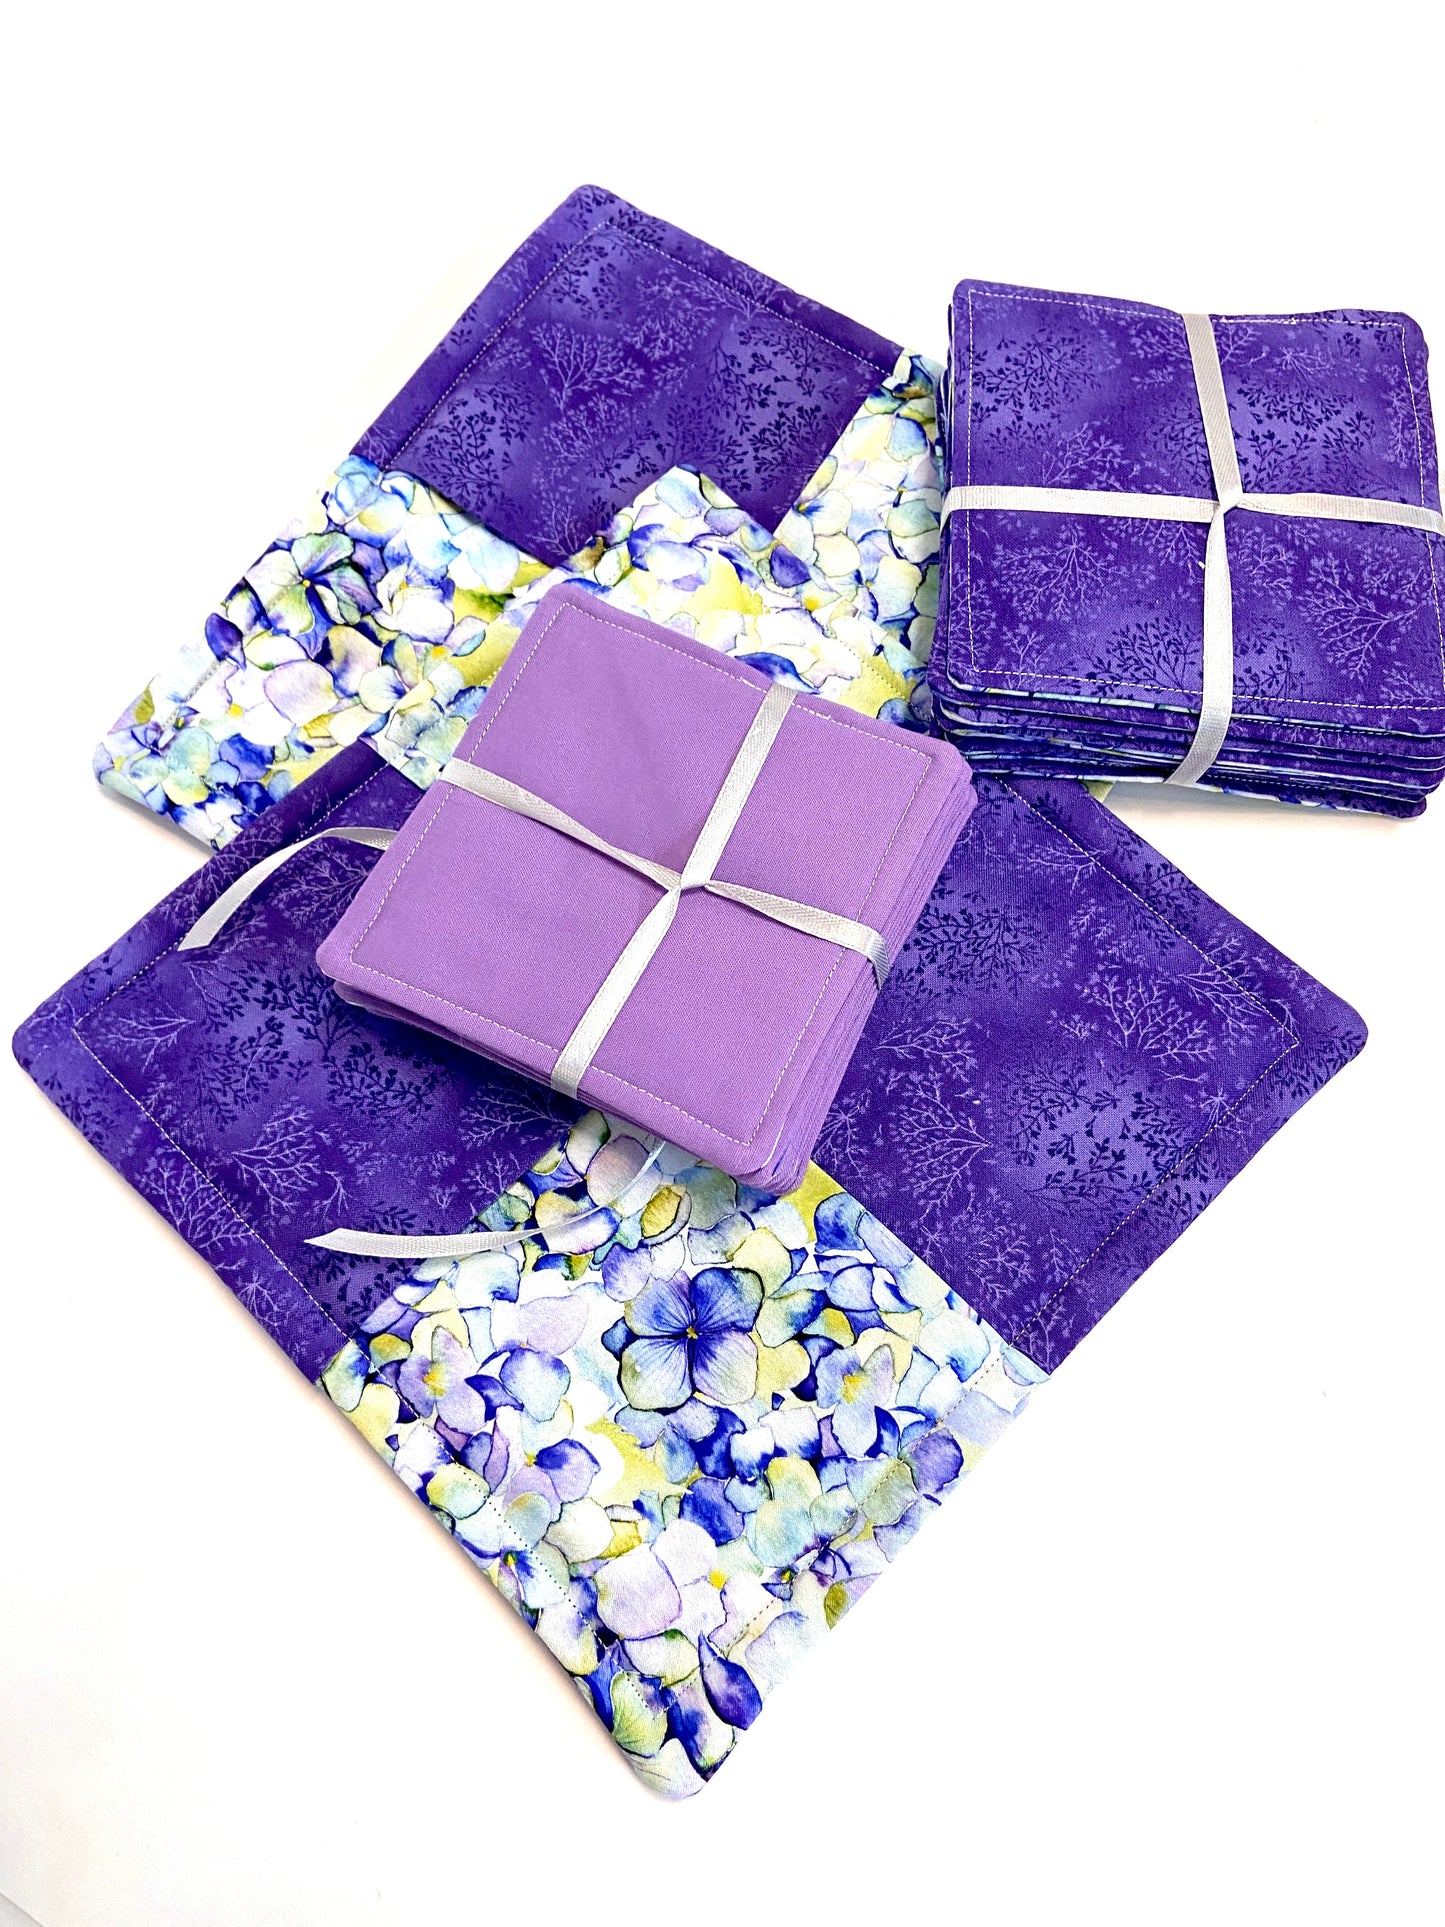 Tabletop Protector Hot Pad and Coasters Set - Purples and Pinks - Silverthorn’s Unique Handmade Decor